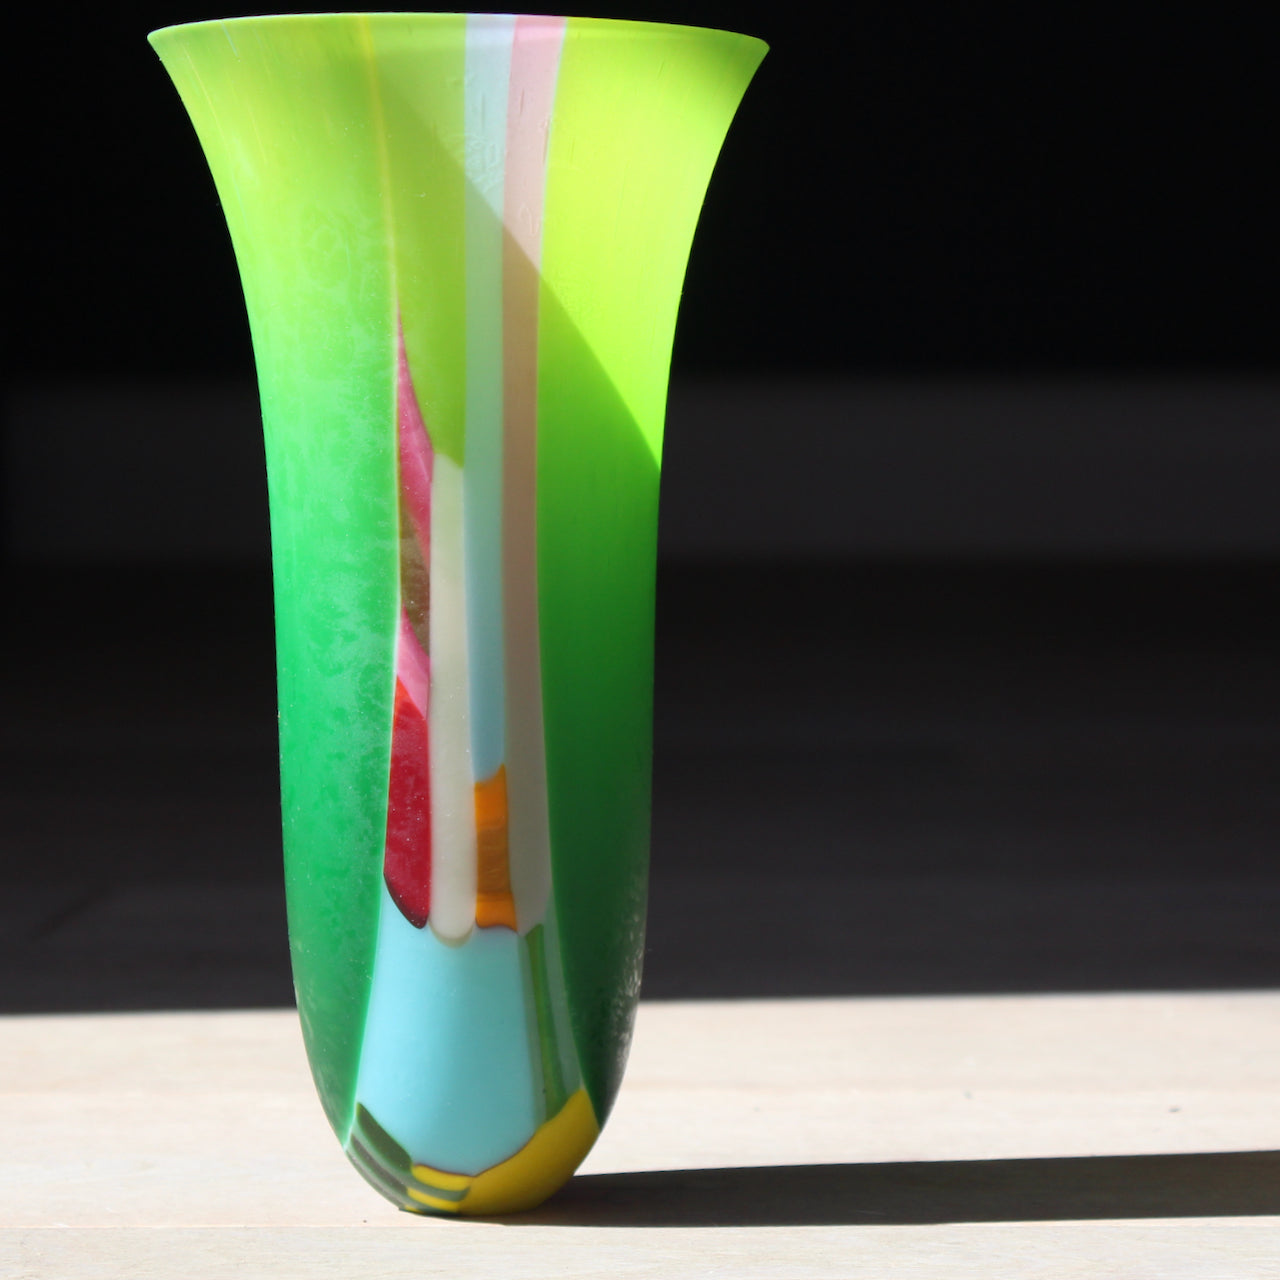 Tall vase by glass artist Ruth Shelley in vibrant tones of green, blue, pink, orange and yellow